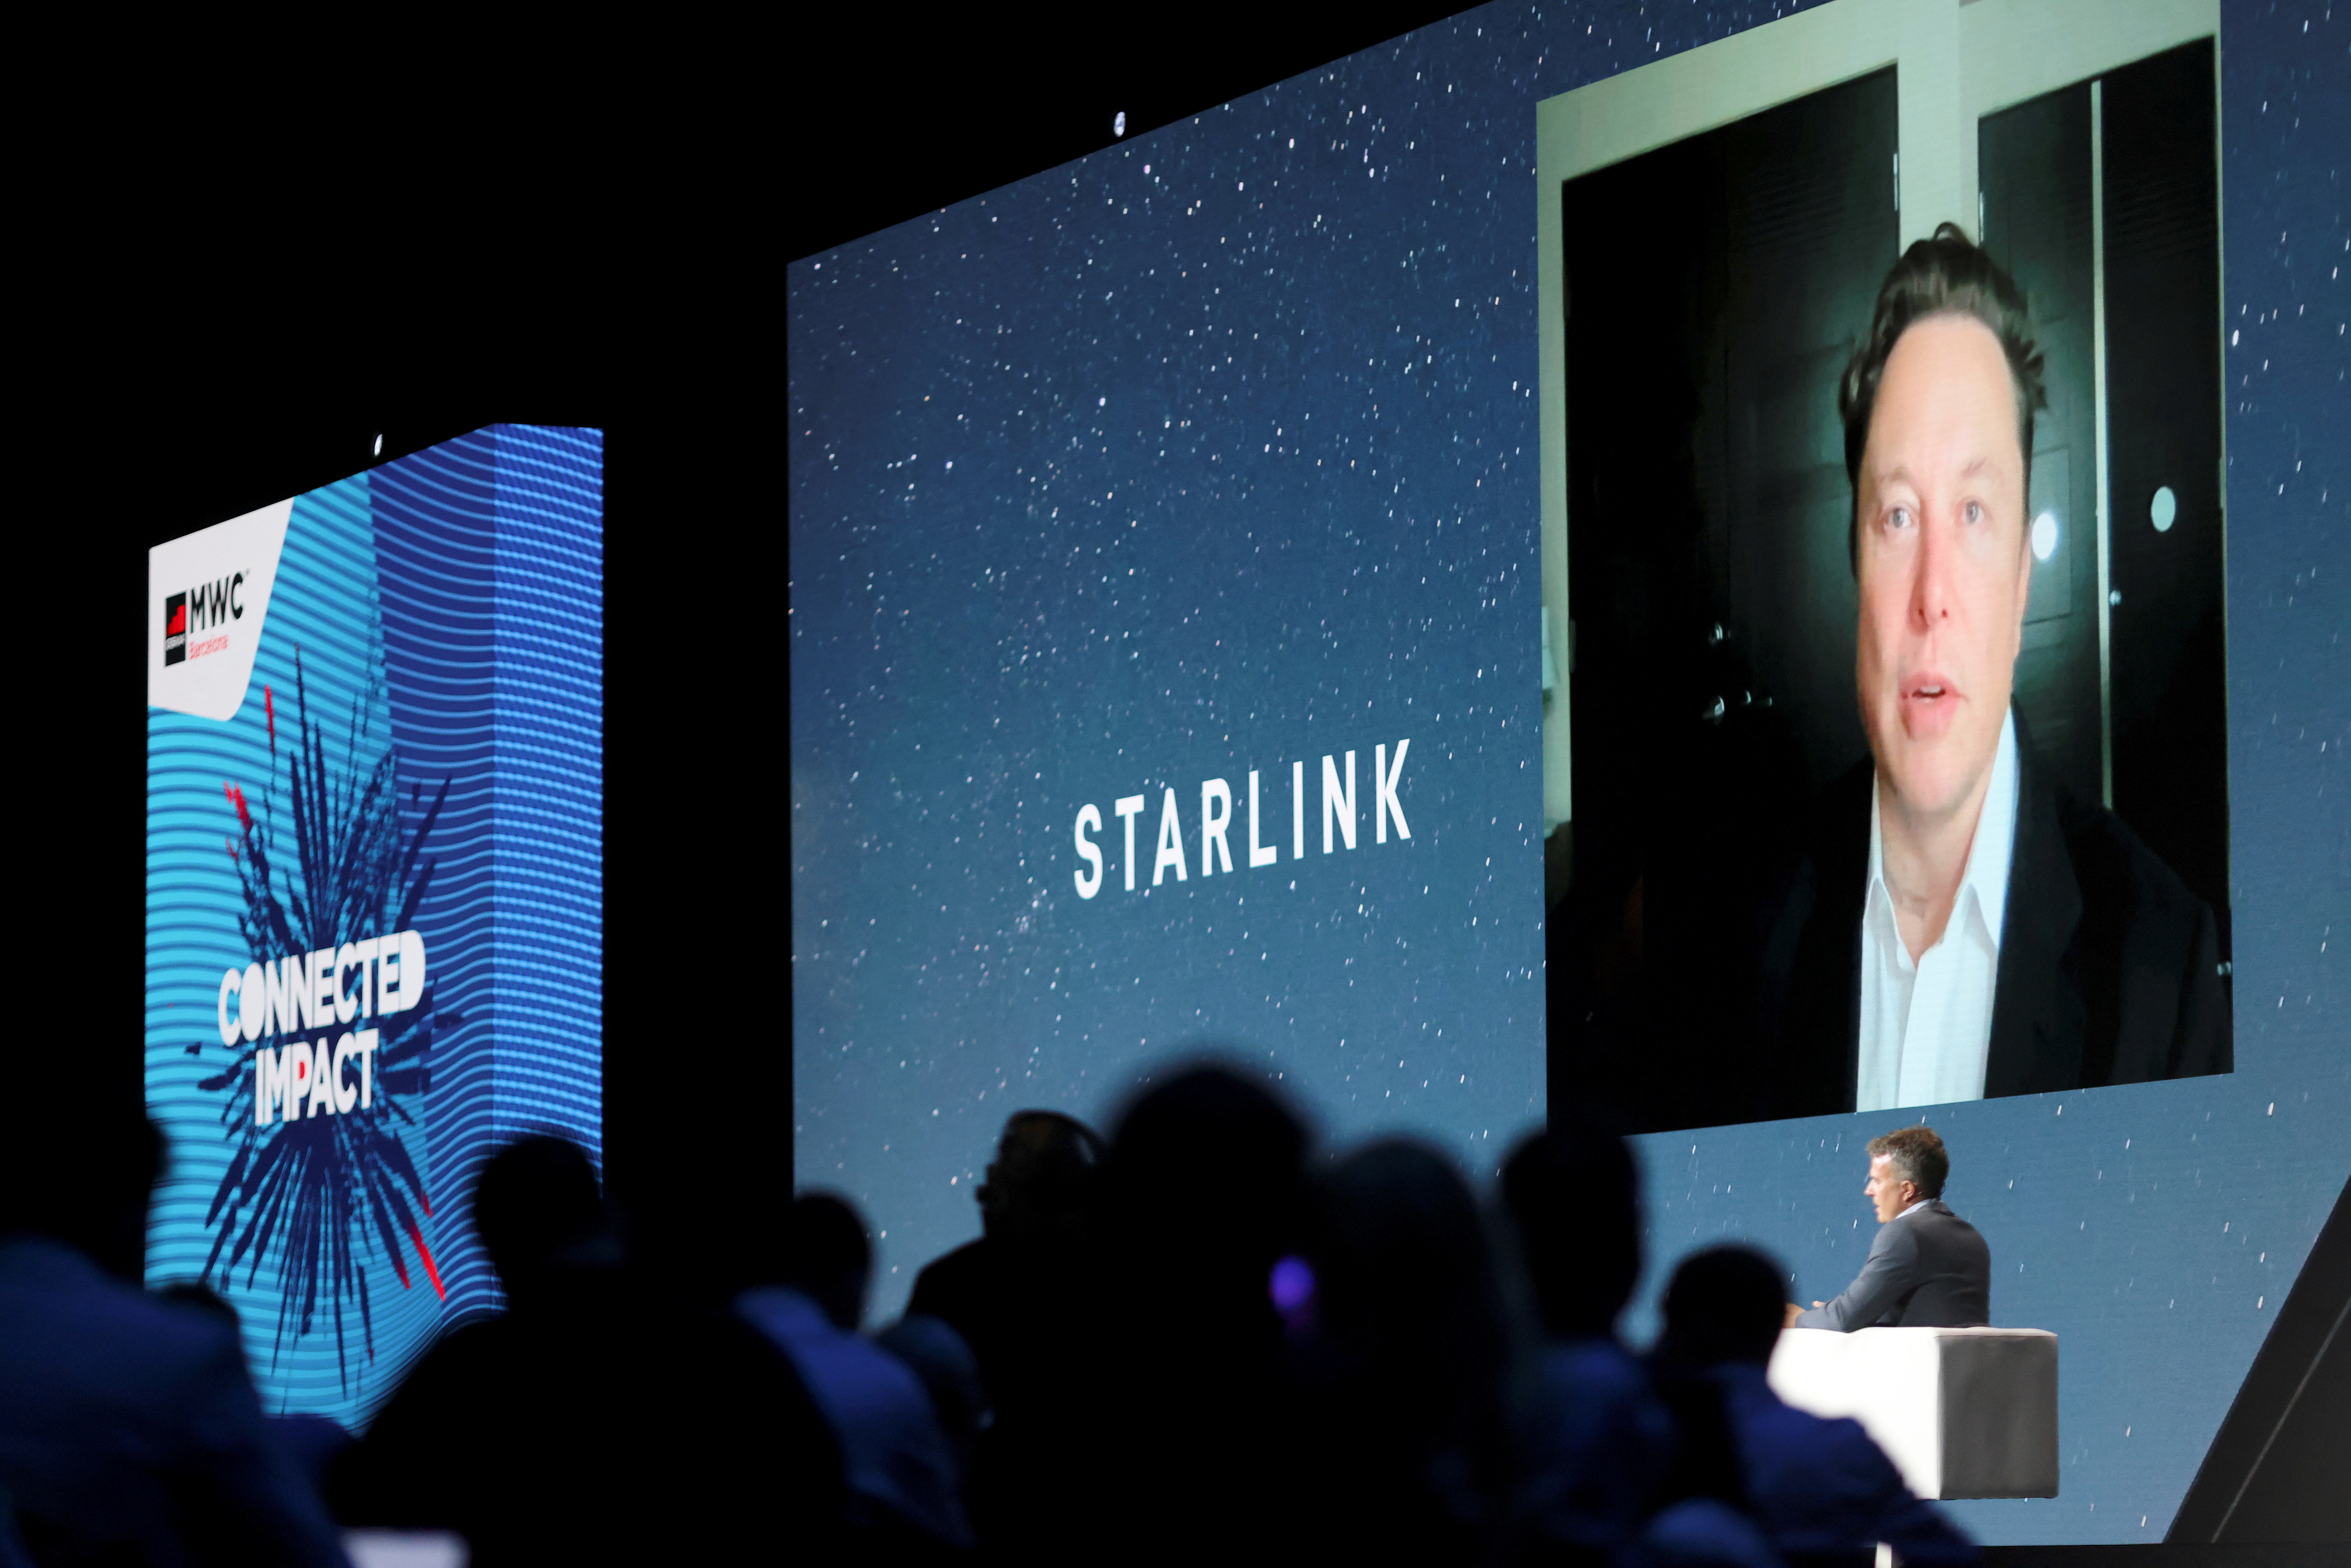 FILE PHOTO: SpaceX founder and Tesla CEO Elon Musk speaks on a screen during the Mobile World Congress (MWC) in Barcelona, Spain, June 29, 2021. REUTERS/Nacho Doce/File Photo